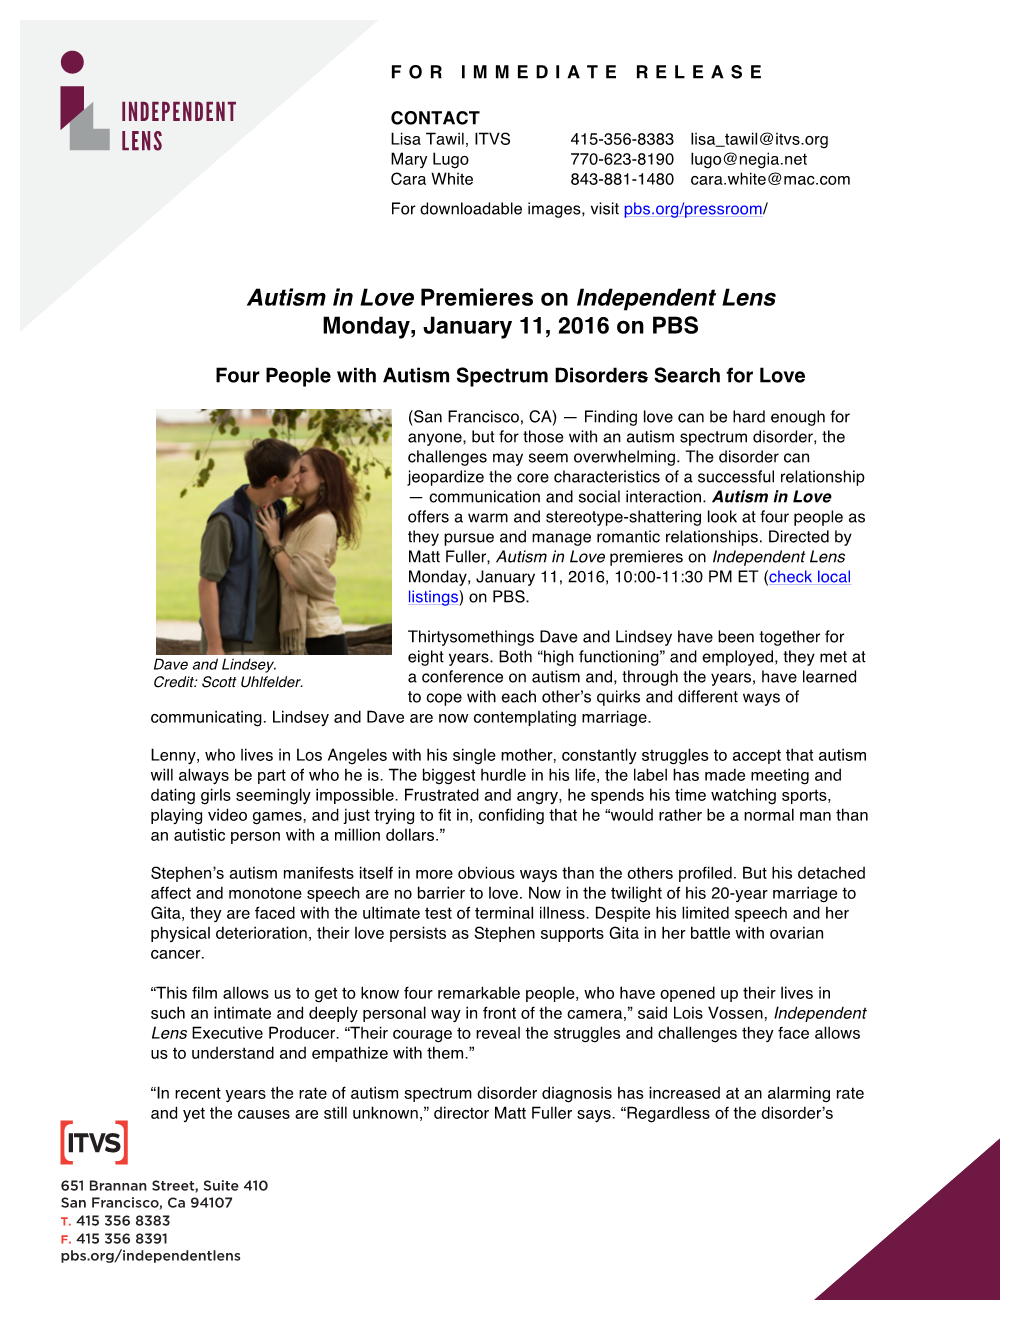 Autism in Love Premieres on Independent Lens Monday, January 11, 2016 on PBS